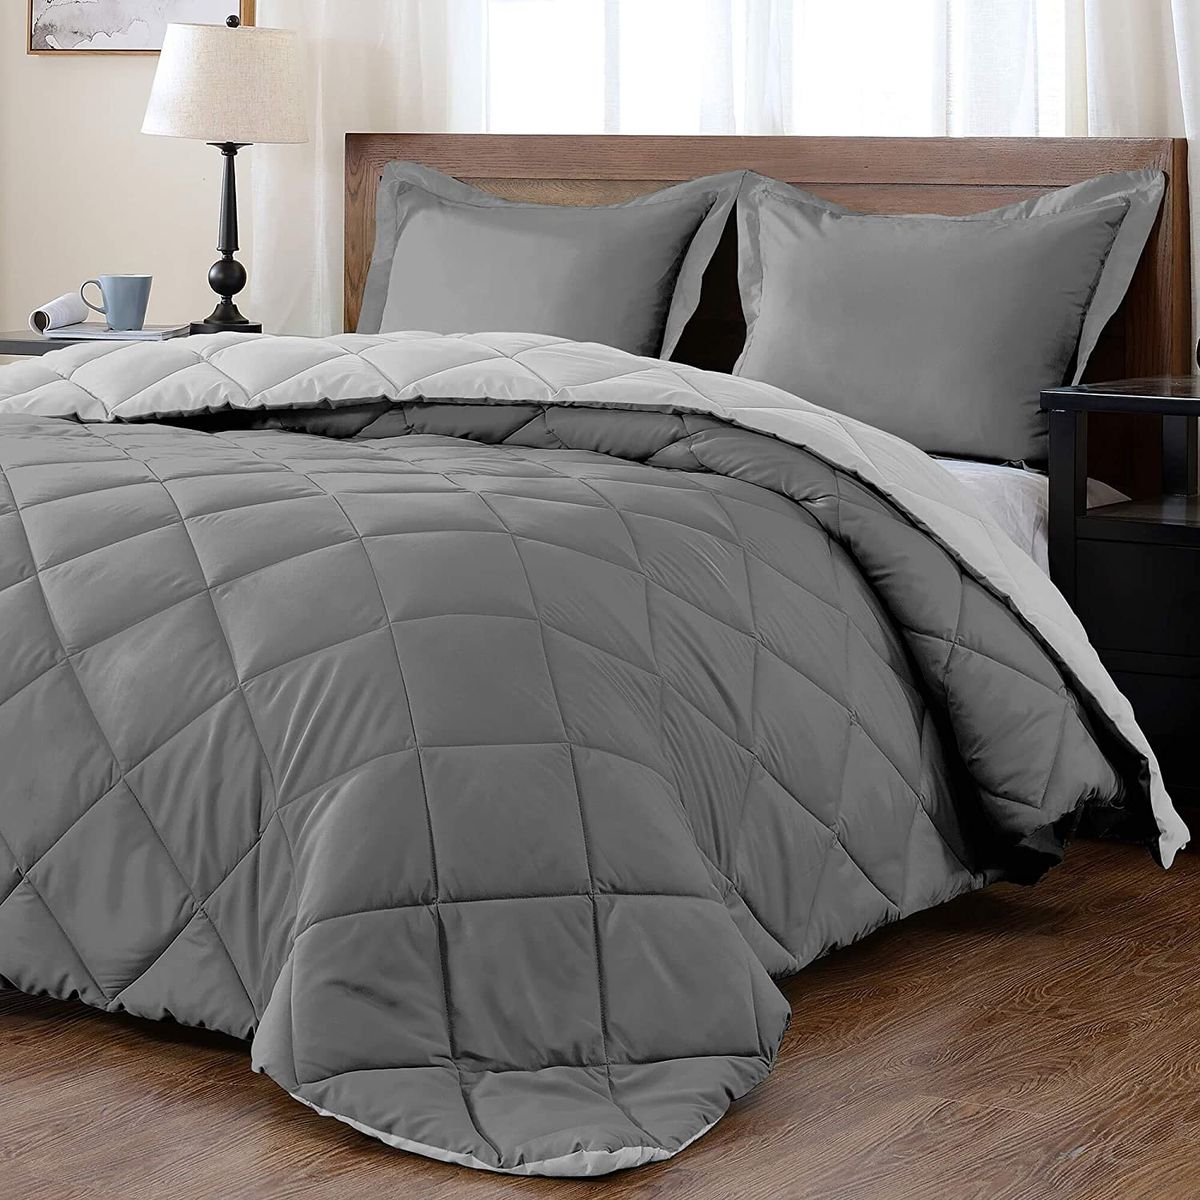 5 Piece Reversible Comforter set Charcoal and Grey, Shop Today. Get it  Tomorrow!